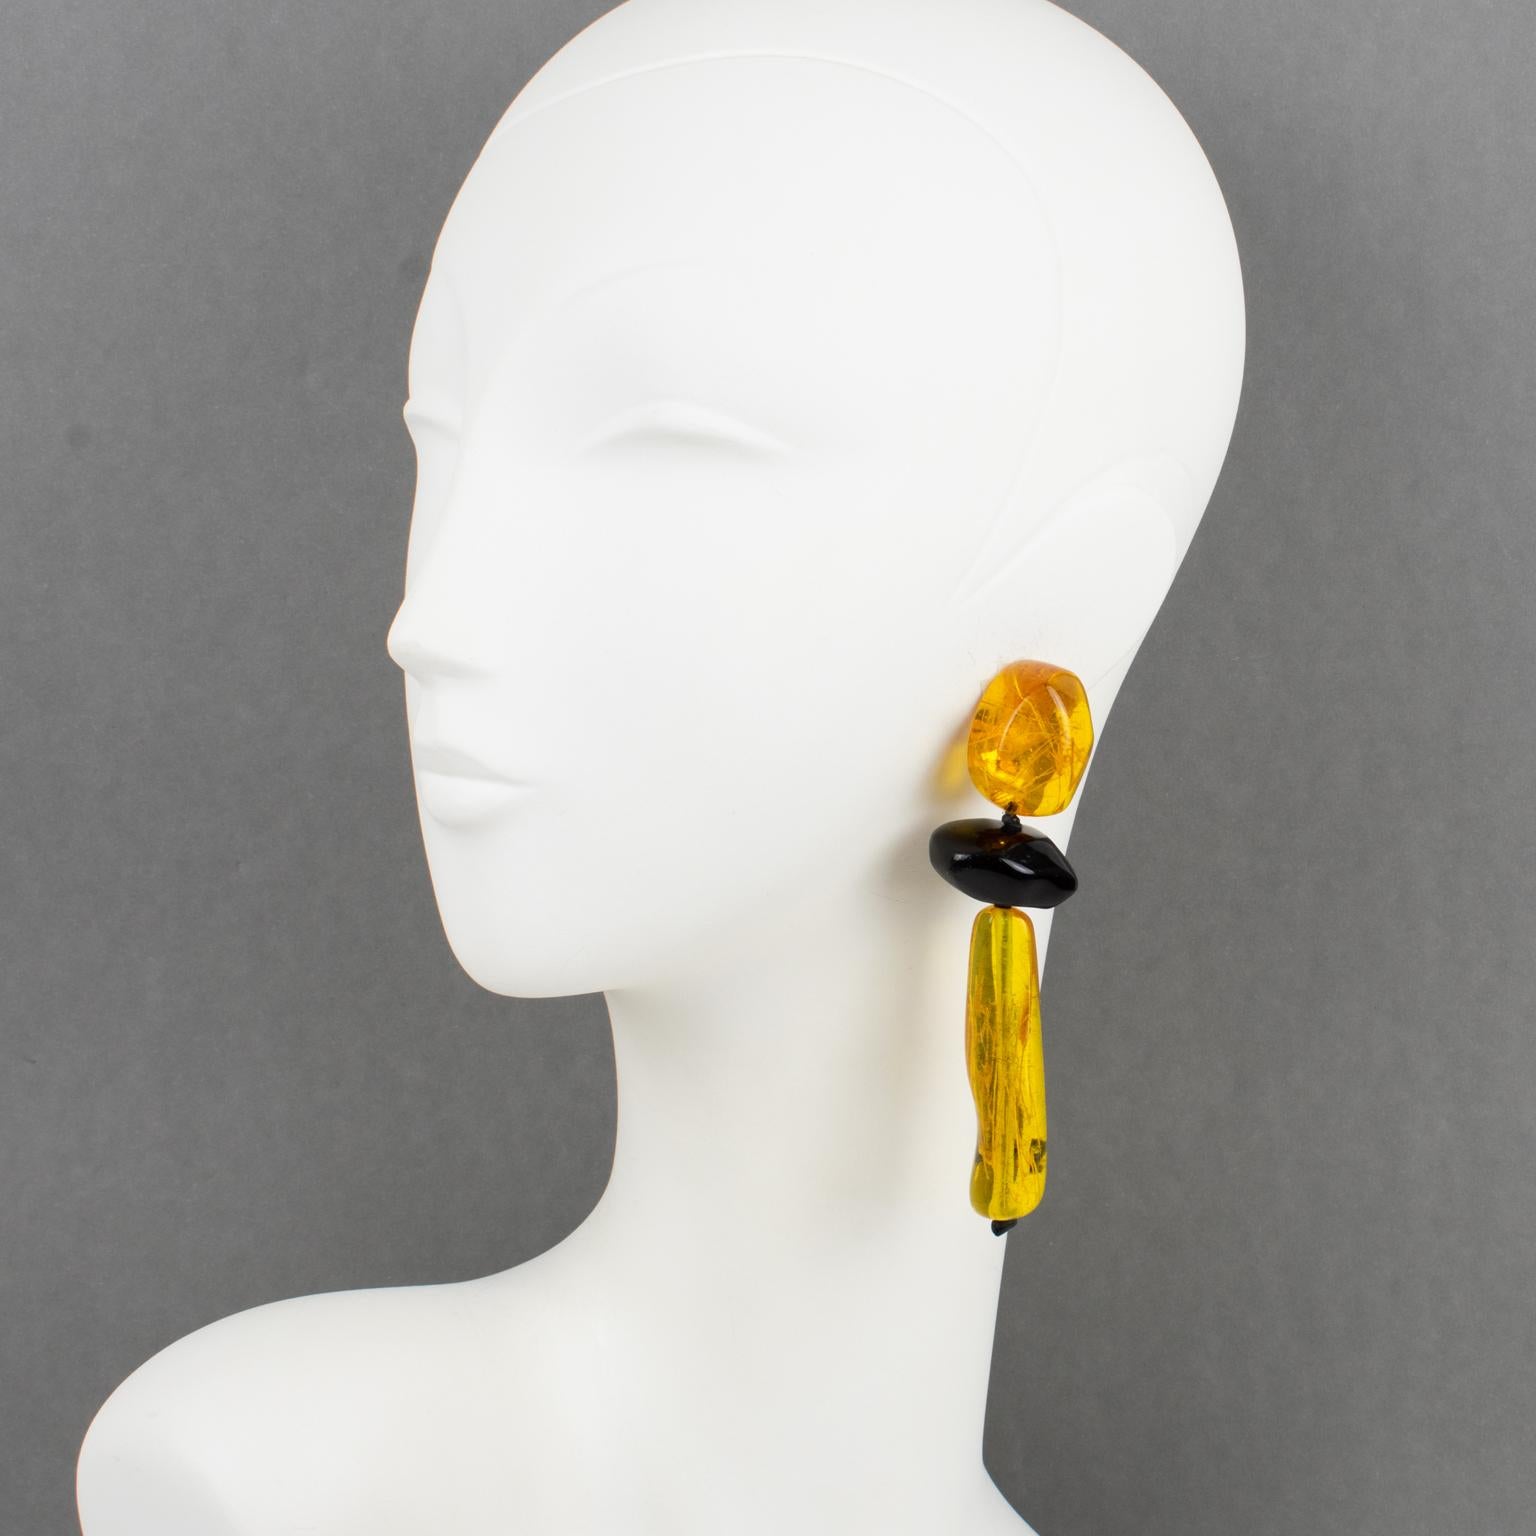 Gerda Lyngaard for Monies designed these stunning oversized dangle clip-on earrings. The pebbles-shaped design is all hand-made and hand-carved using resin with inclusions. The shiny black elements are contrasted with burnt orange amber long drops